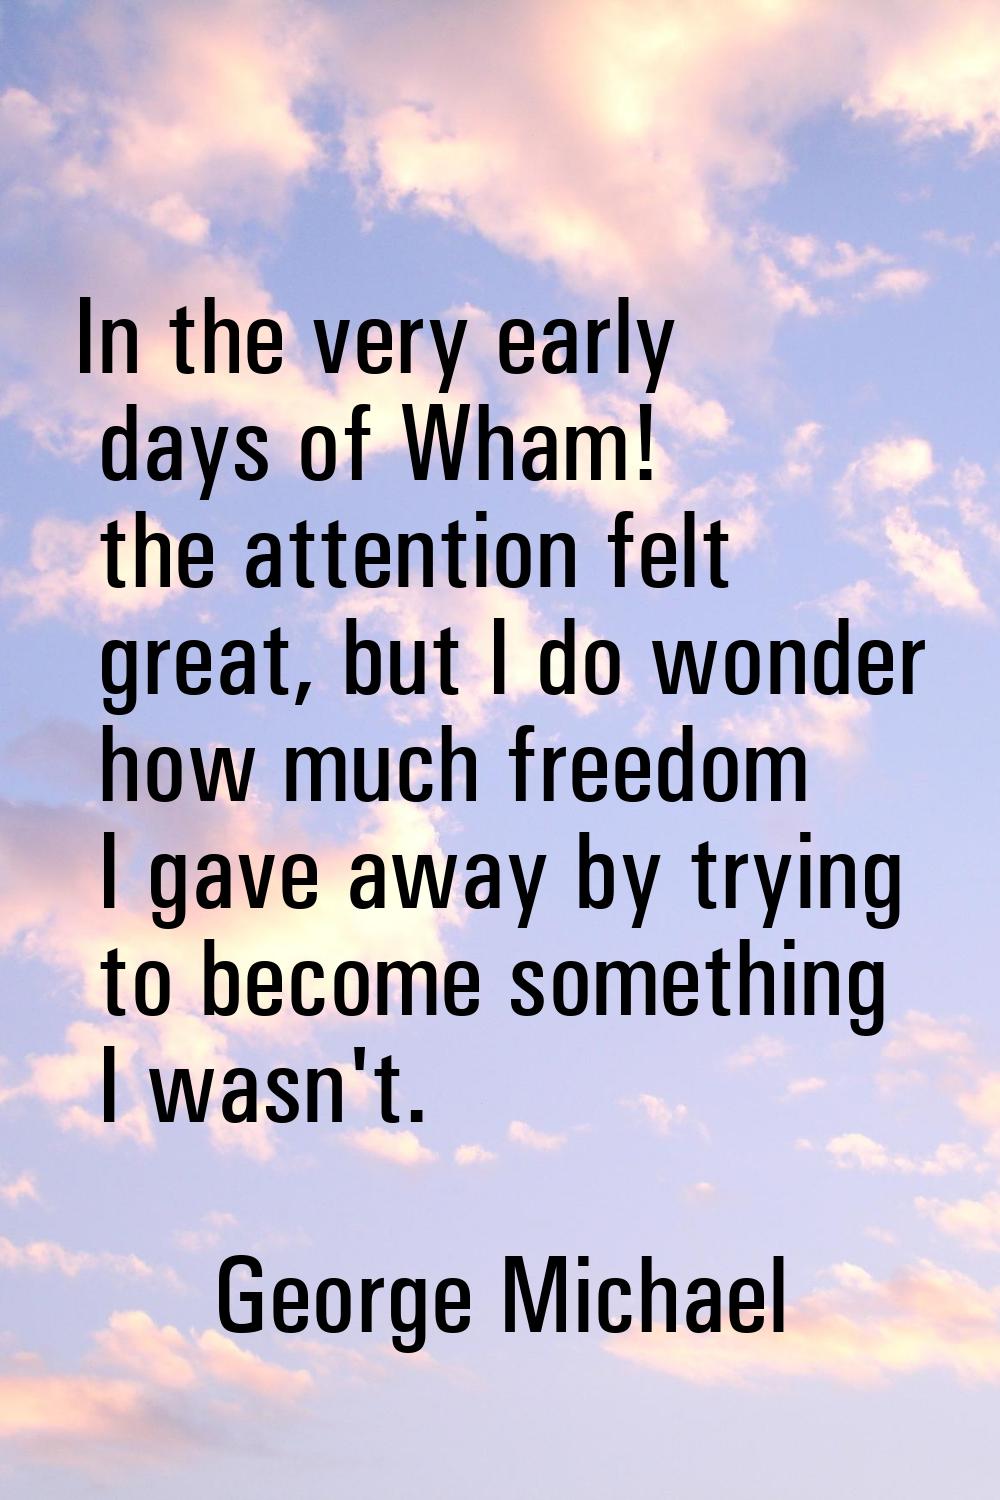 In the very early days of Wham! the attention felt great, but I do wonder how much freedom I gave a